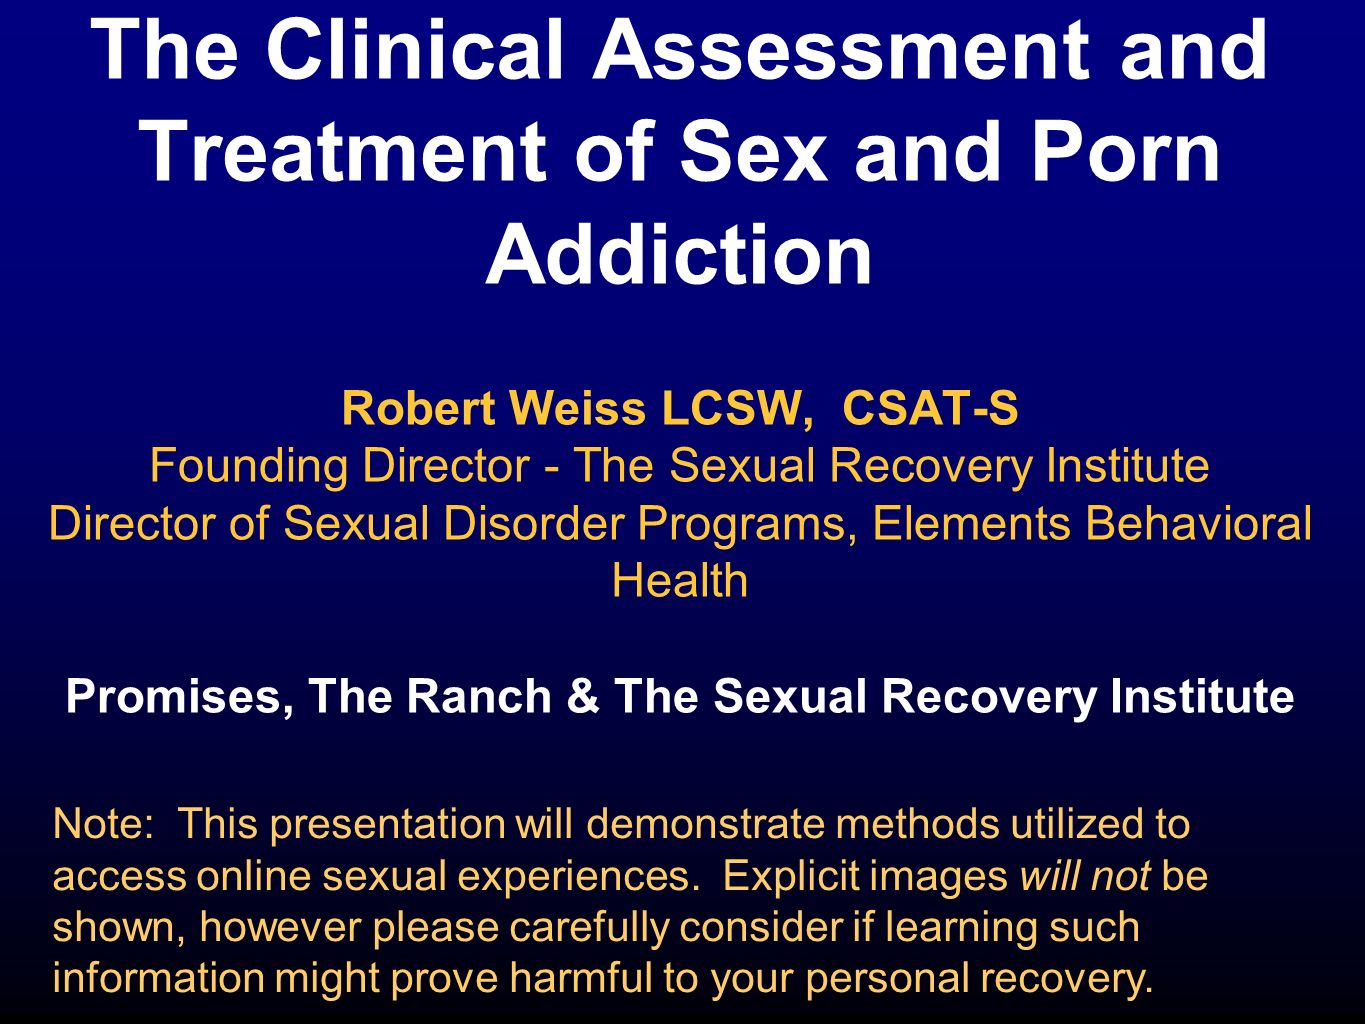 The Clinical Assessment and Treatment of Sex and Porn Addiction photo